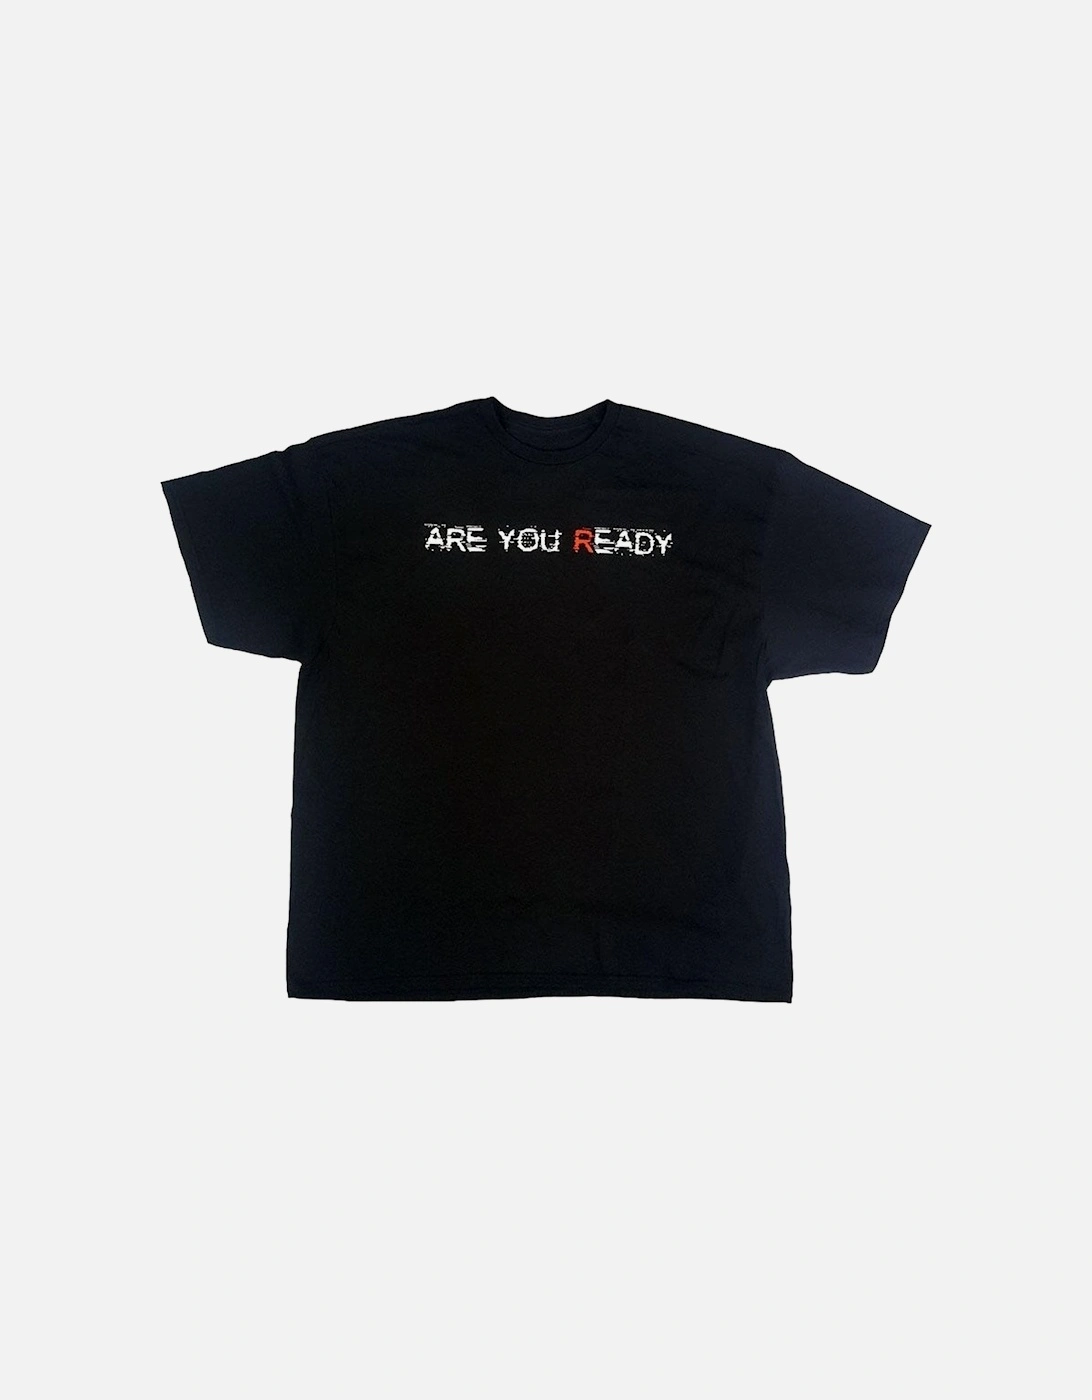 Unisex Adult Are You Ready? Cotton T-Shirt